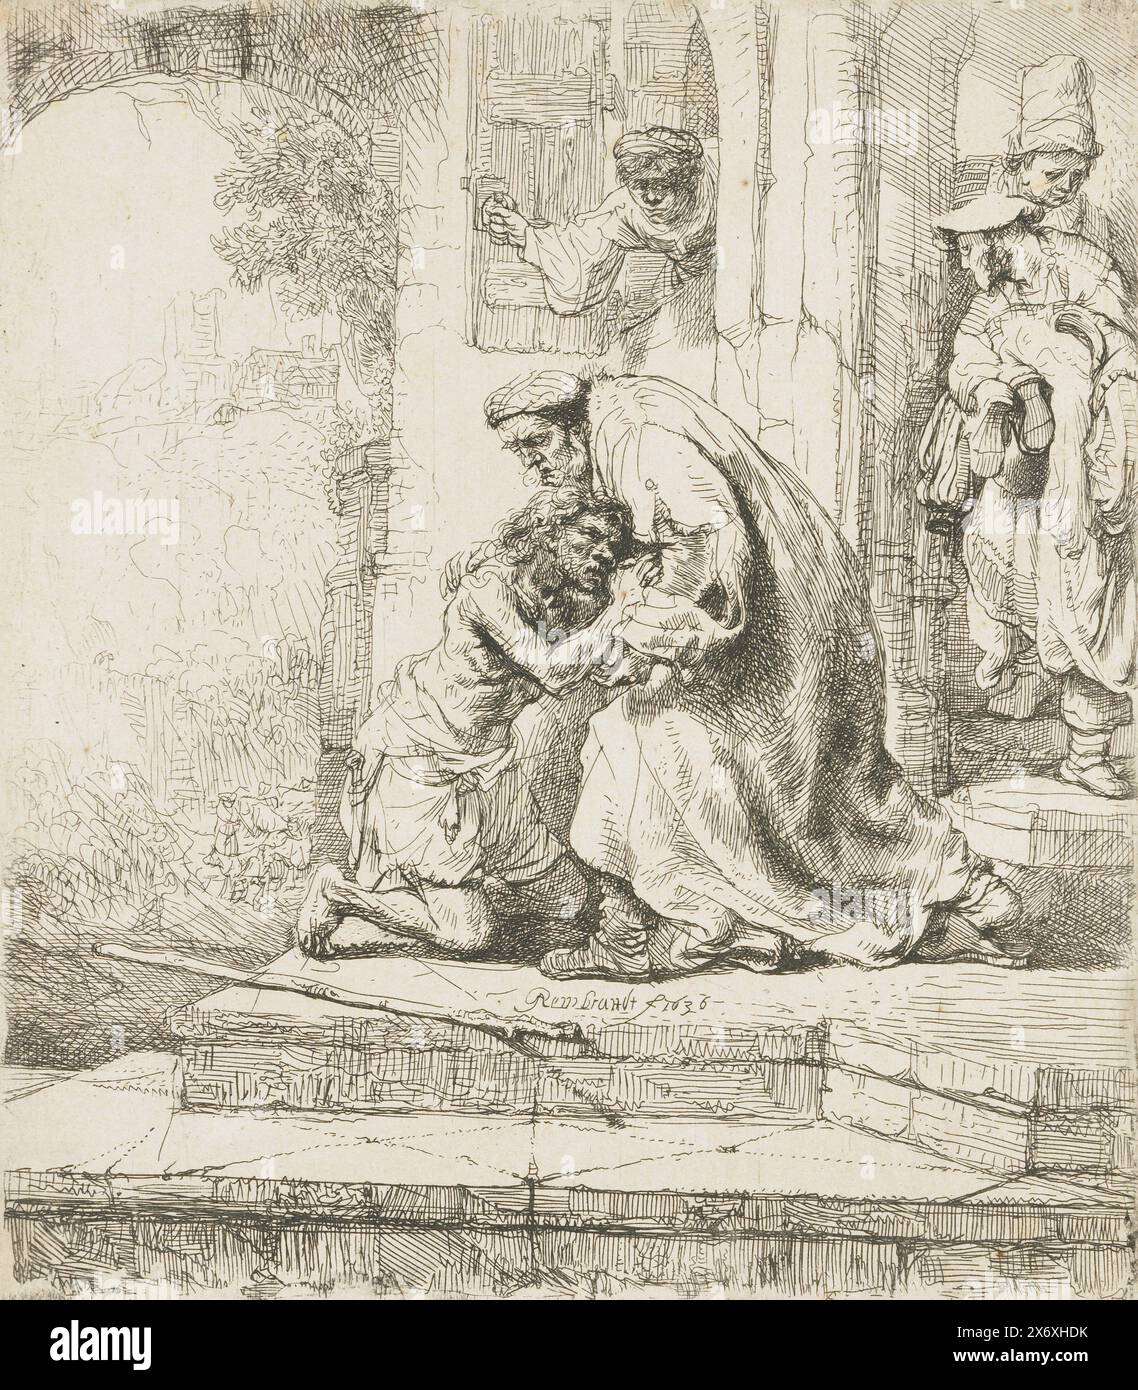 The return of the prodigal son: he kneels before his father on the steps of his parental home. Two figures in the doorway, a third looking out the window., print, print maker: Rembrandt van Rijn, (mentioned on object), after own design by: Rembrandt van Rijn, 1636, paper, etching, height, 156 mm × width, 136 mm Stock Photo